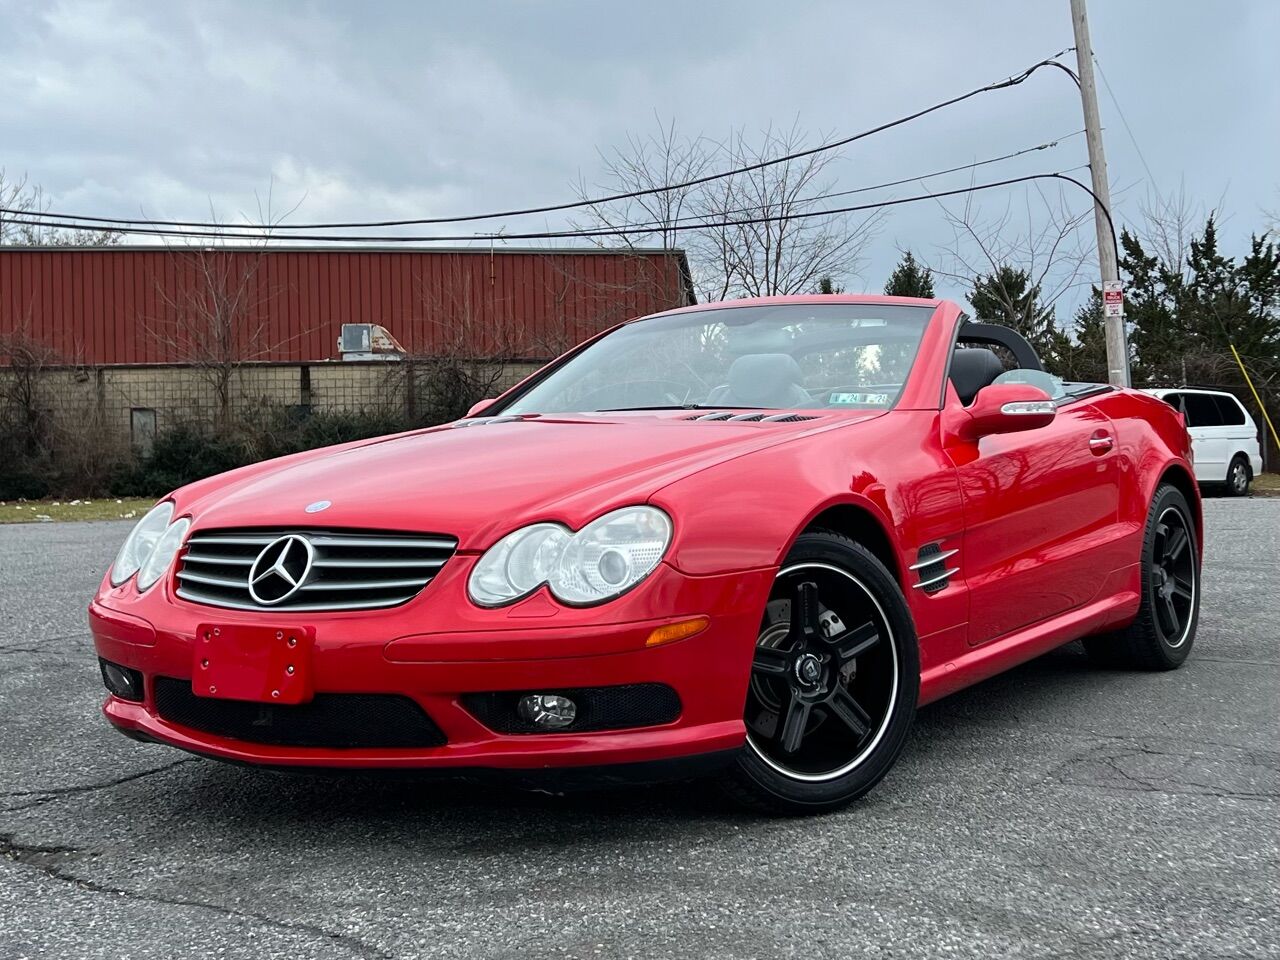 Mercedes-Benz SL-Class For Sale In Allentown, PA - Carsforsale.com®